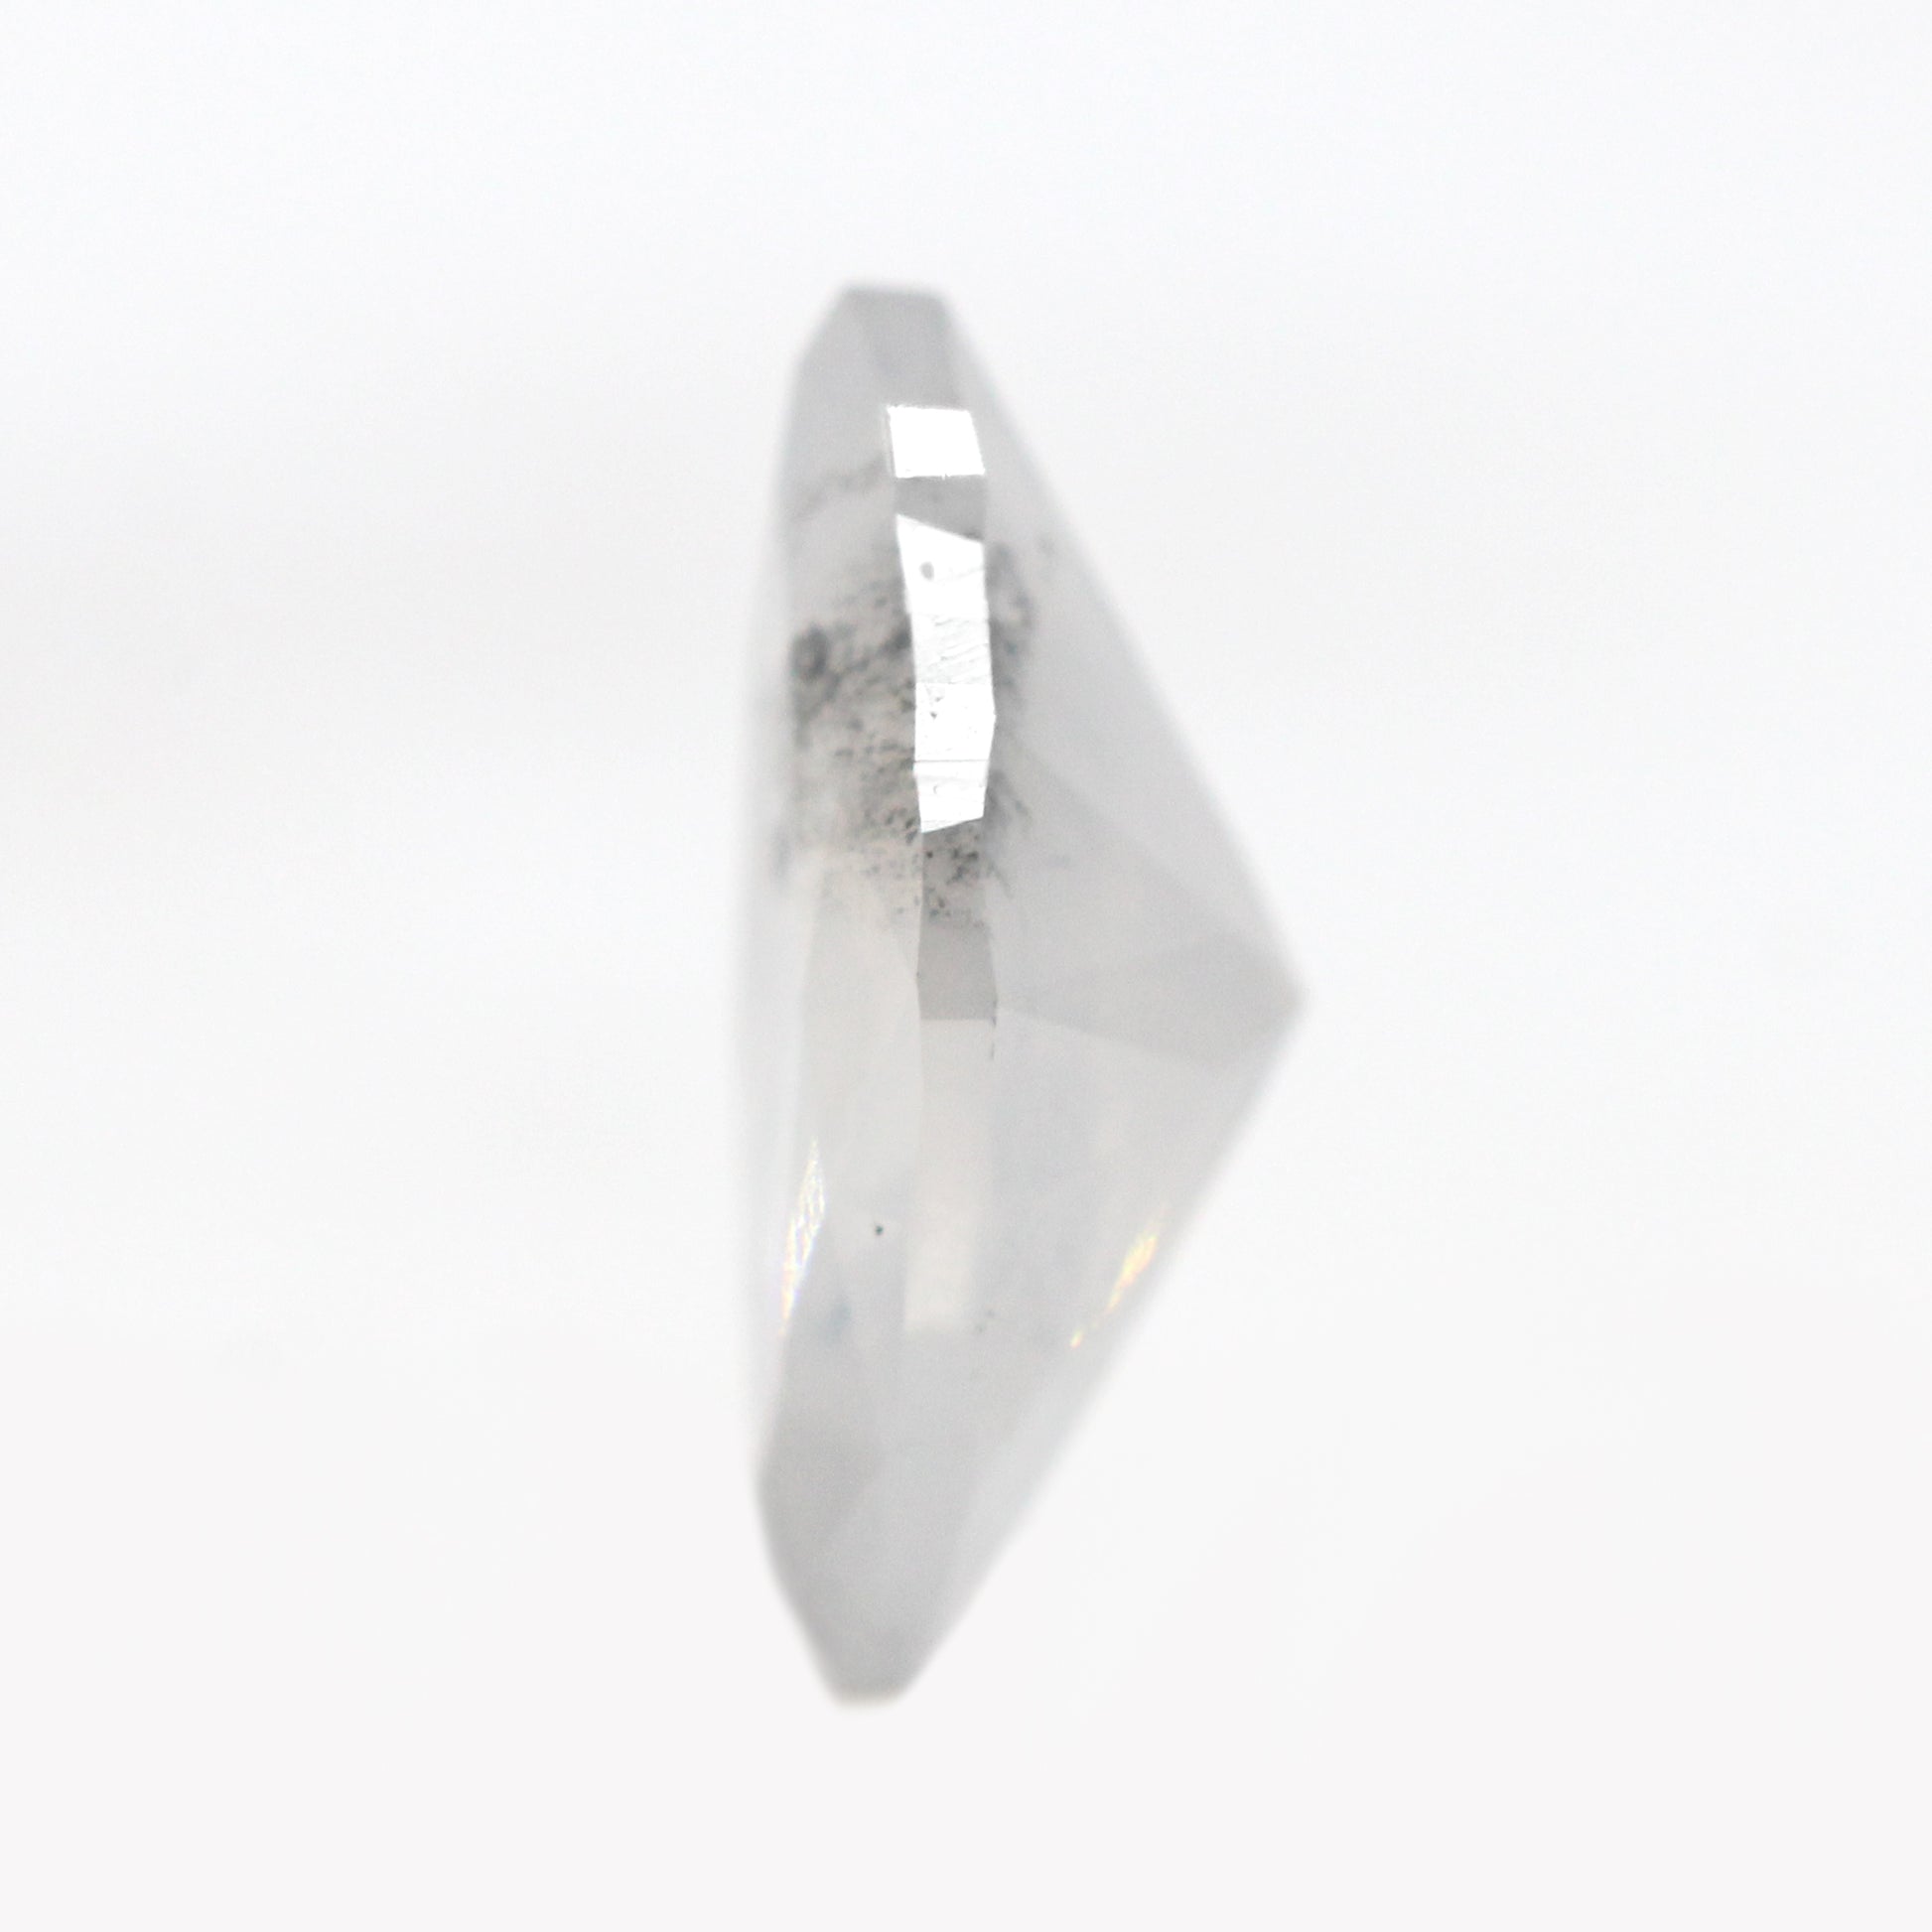 0.80 Carat Misty Gray Marquise Celestial Diamond for Custom Work - Inventory Code MGM080 - Midwinter Co. Alternative Bridal Rings and Modern Fine Jewelry